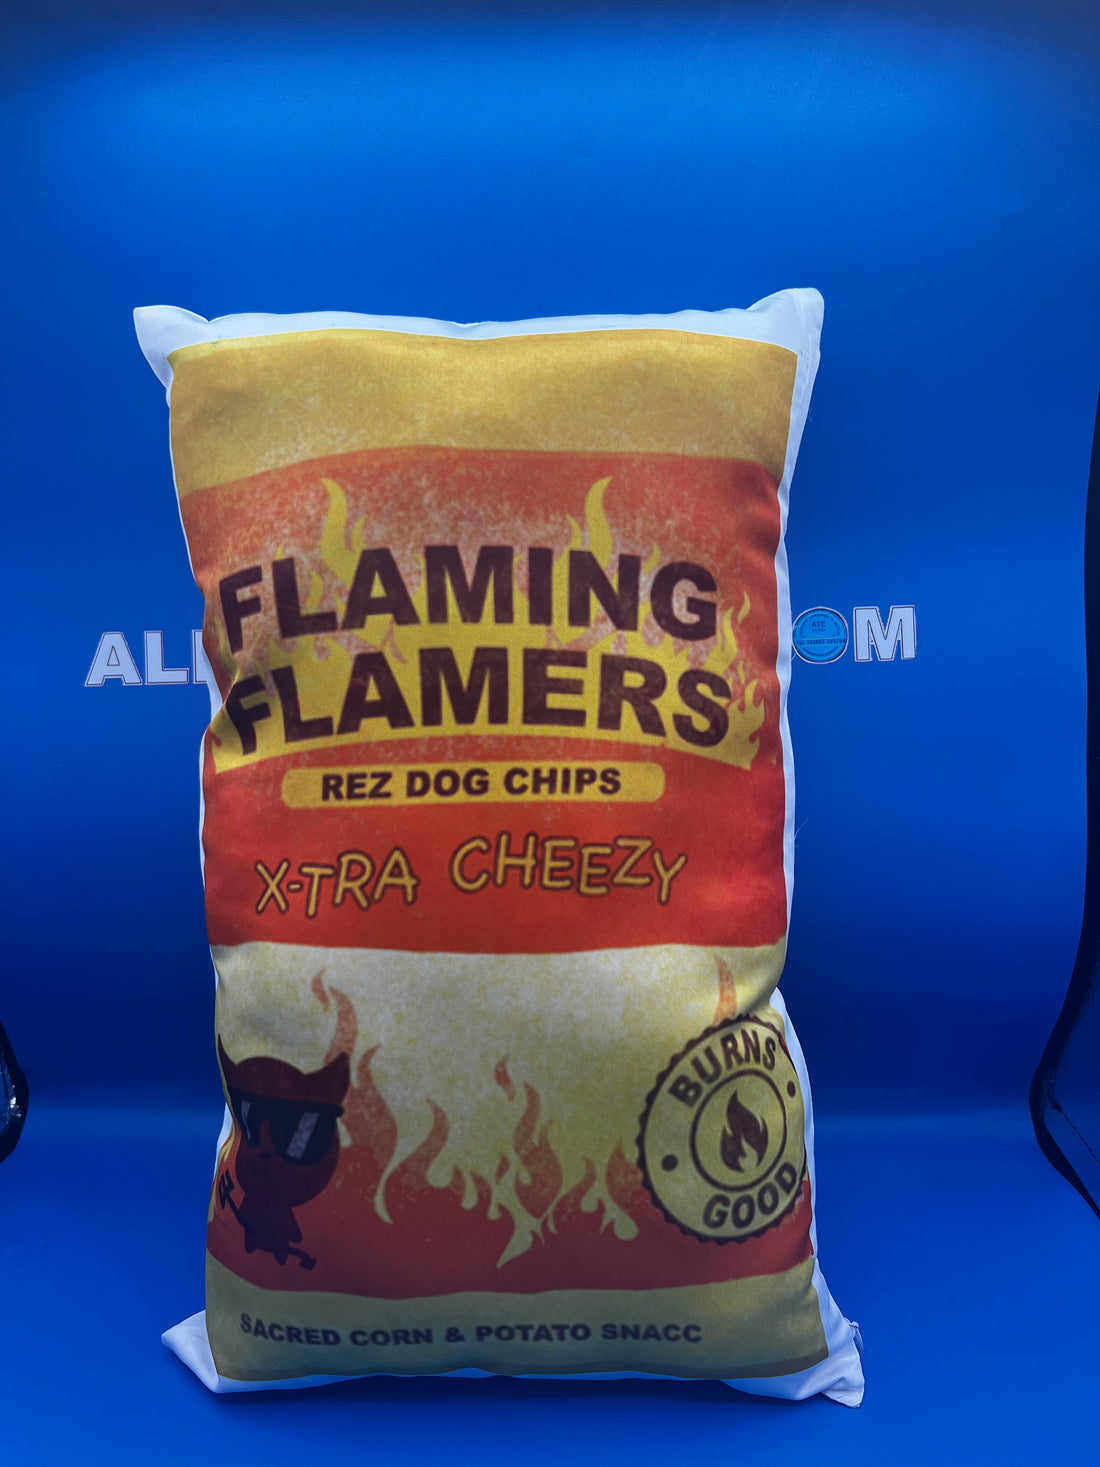 Flaming Flamers Photo Pillow